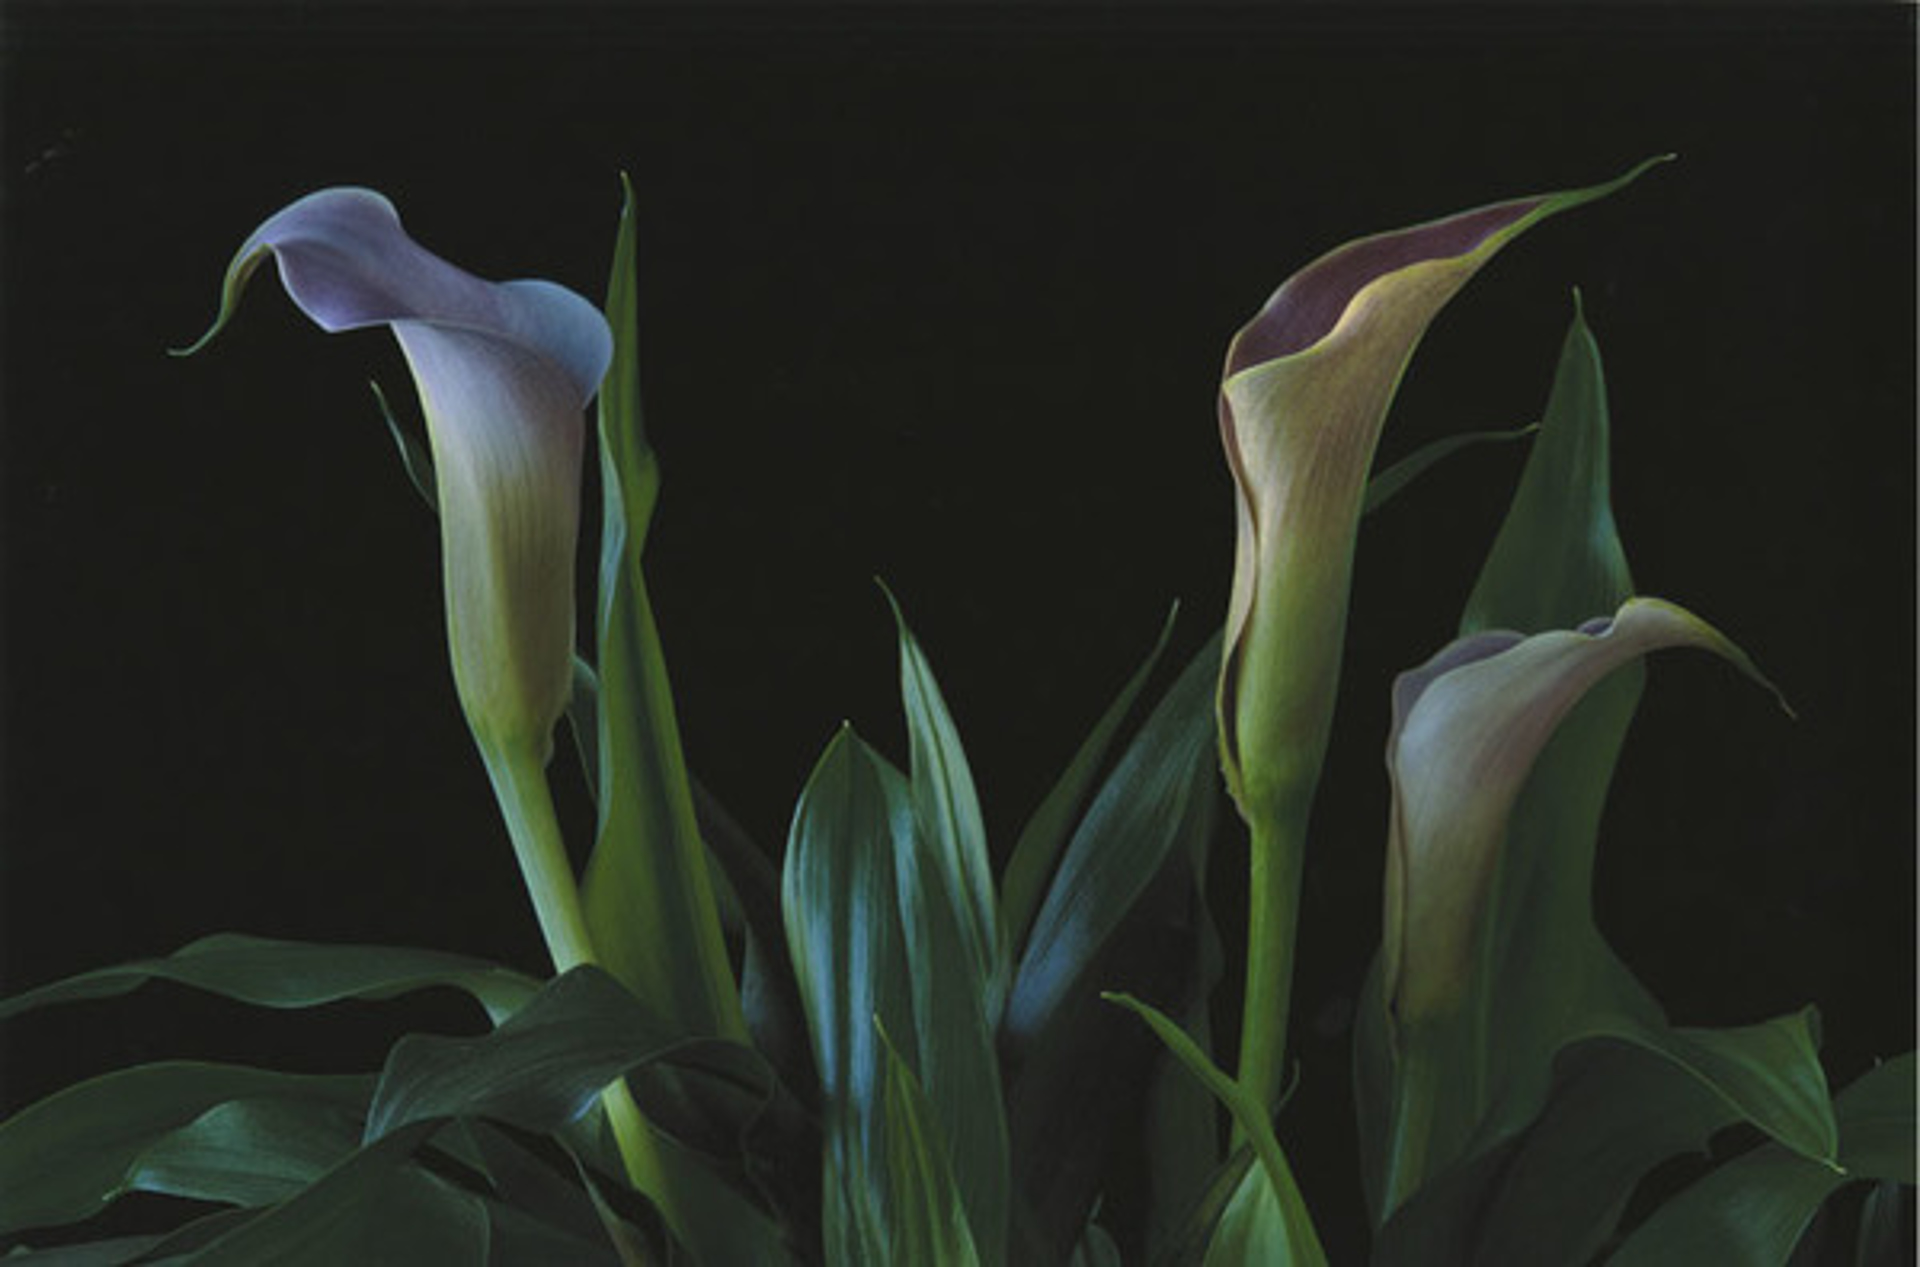 Calla Lily #2 by Murray Weiss